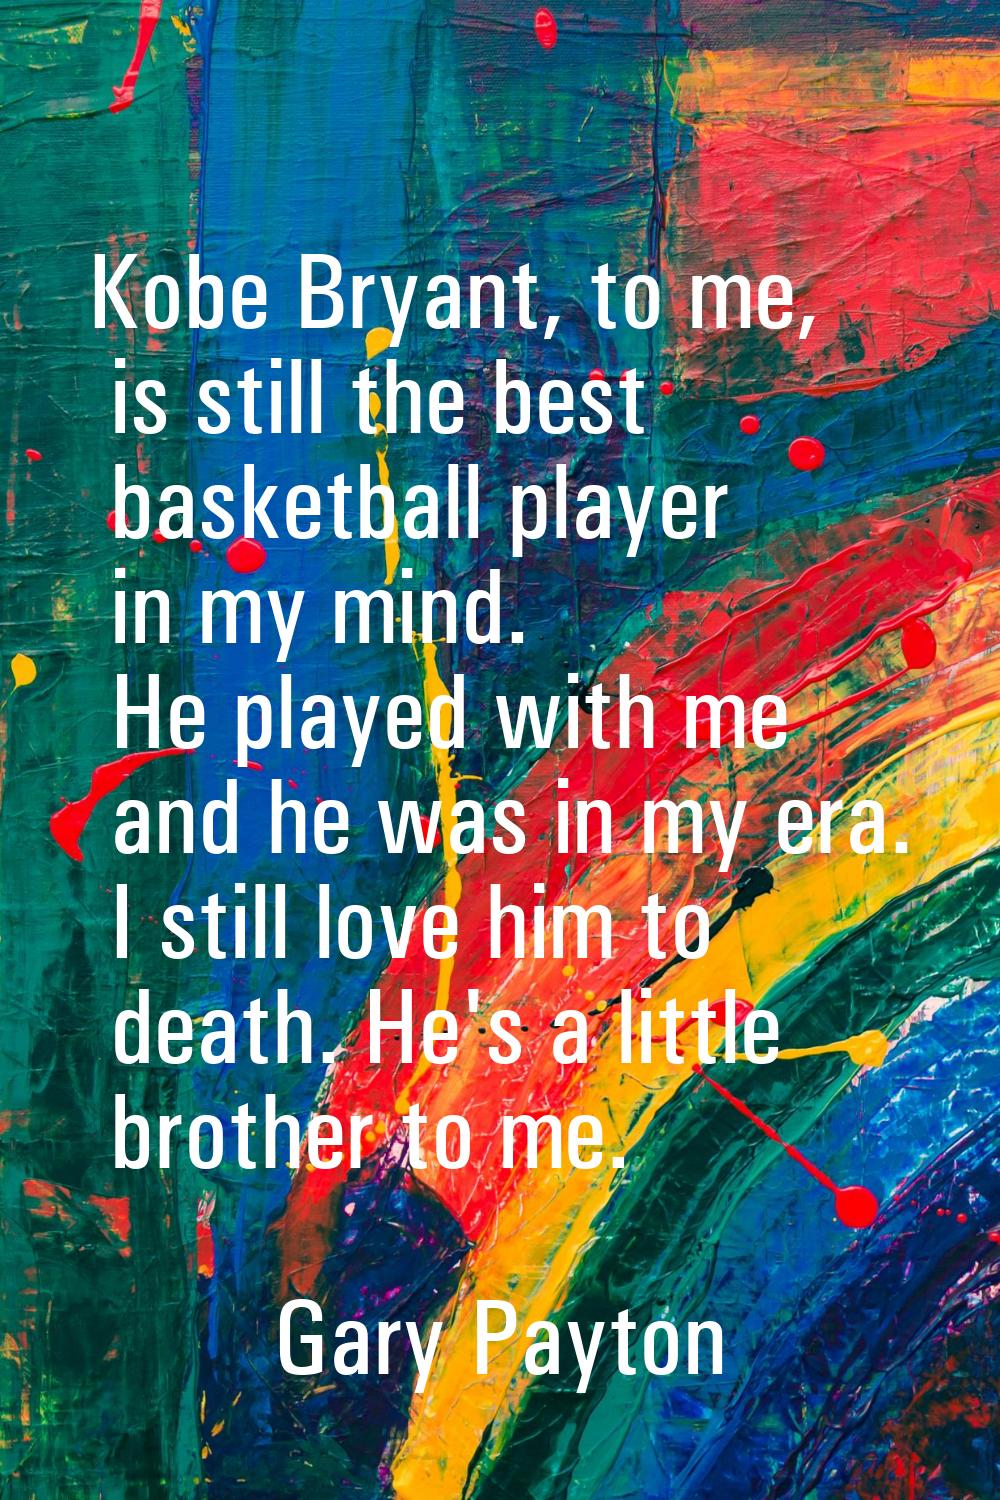 Kobe Bryant, to me, is still the best basketball player in my mind. He played with me and he was in